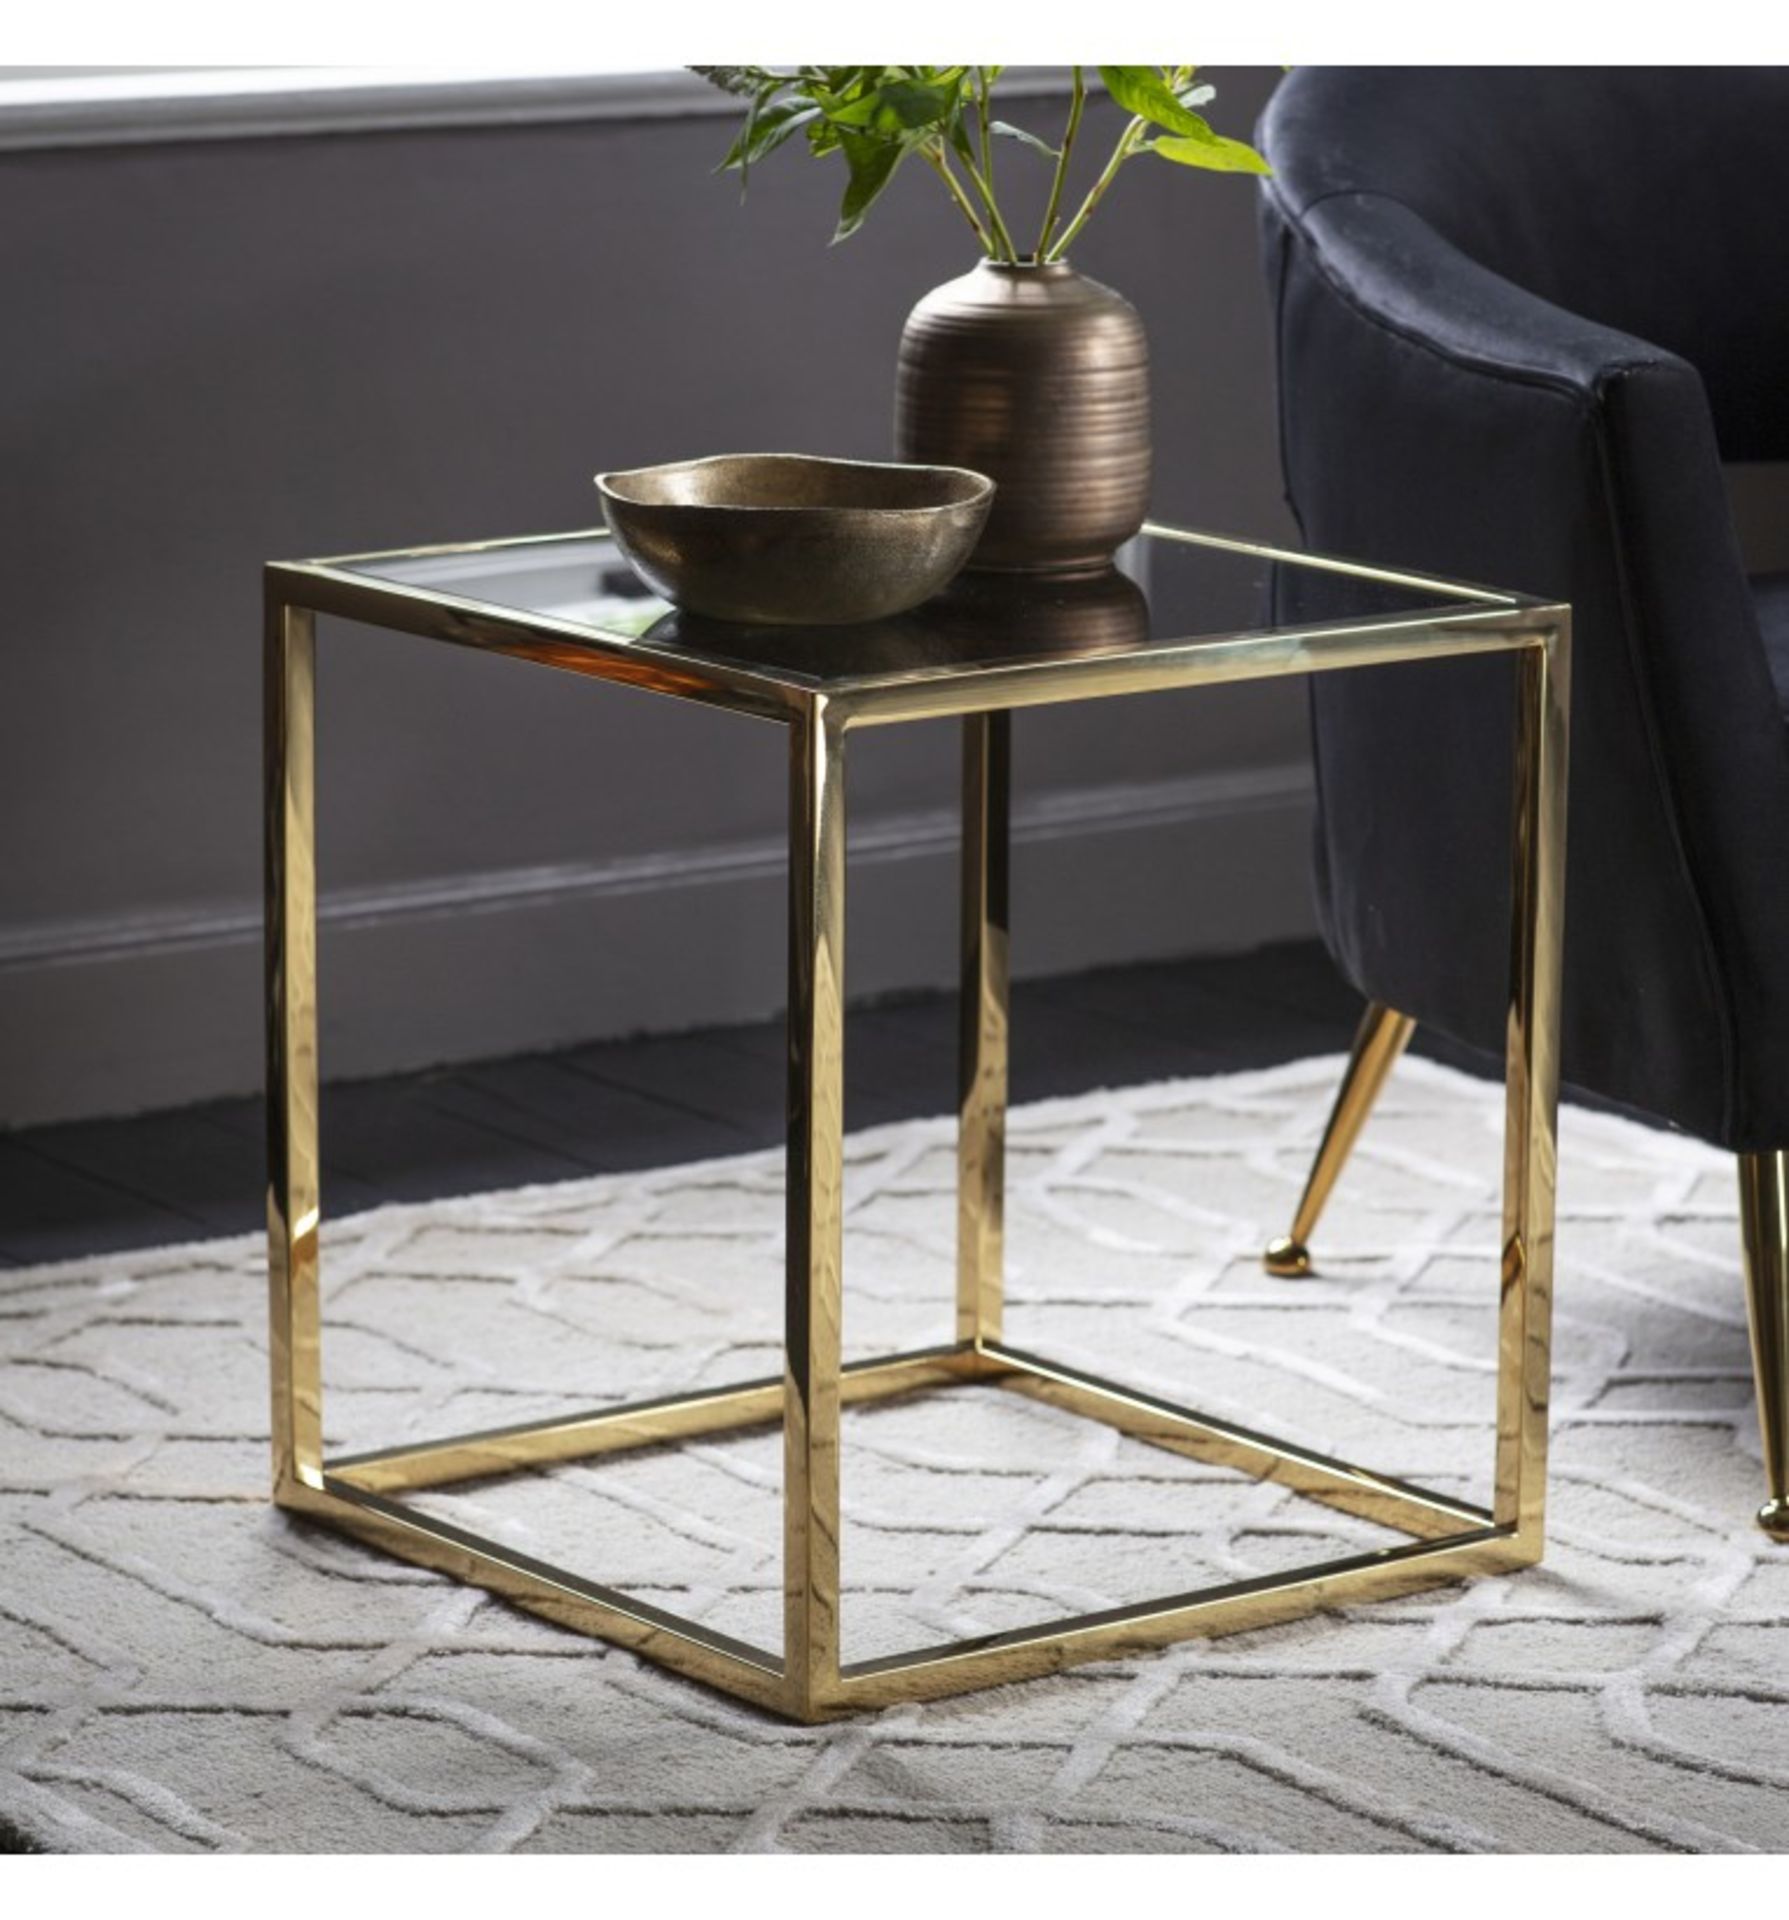 Santorino Side Table Gold 470 X 470 X 500mm This Simple Yet Sophisticated Side Table Is The